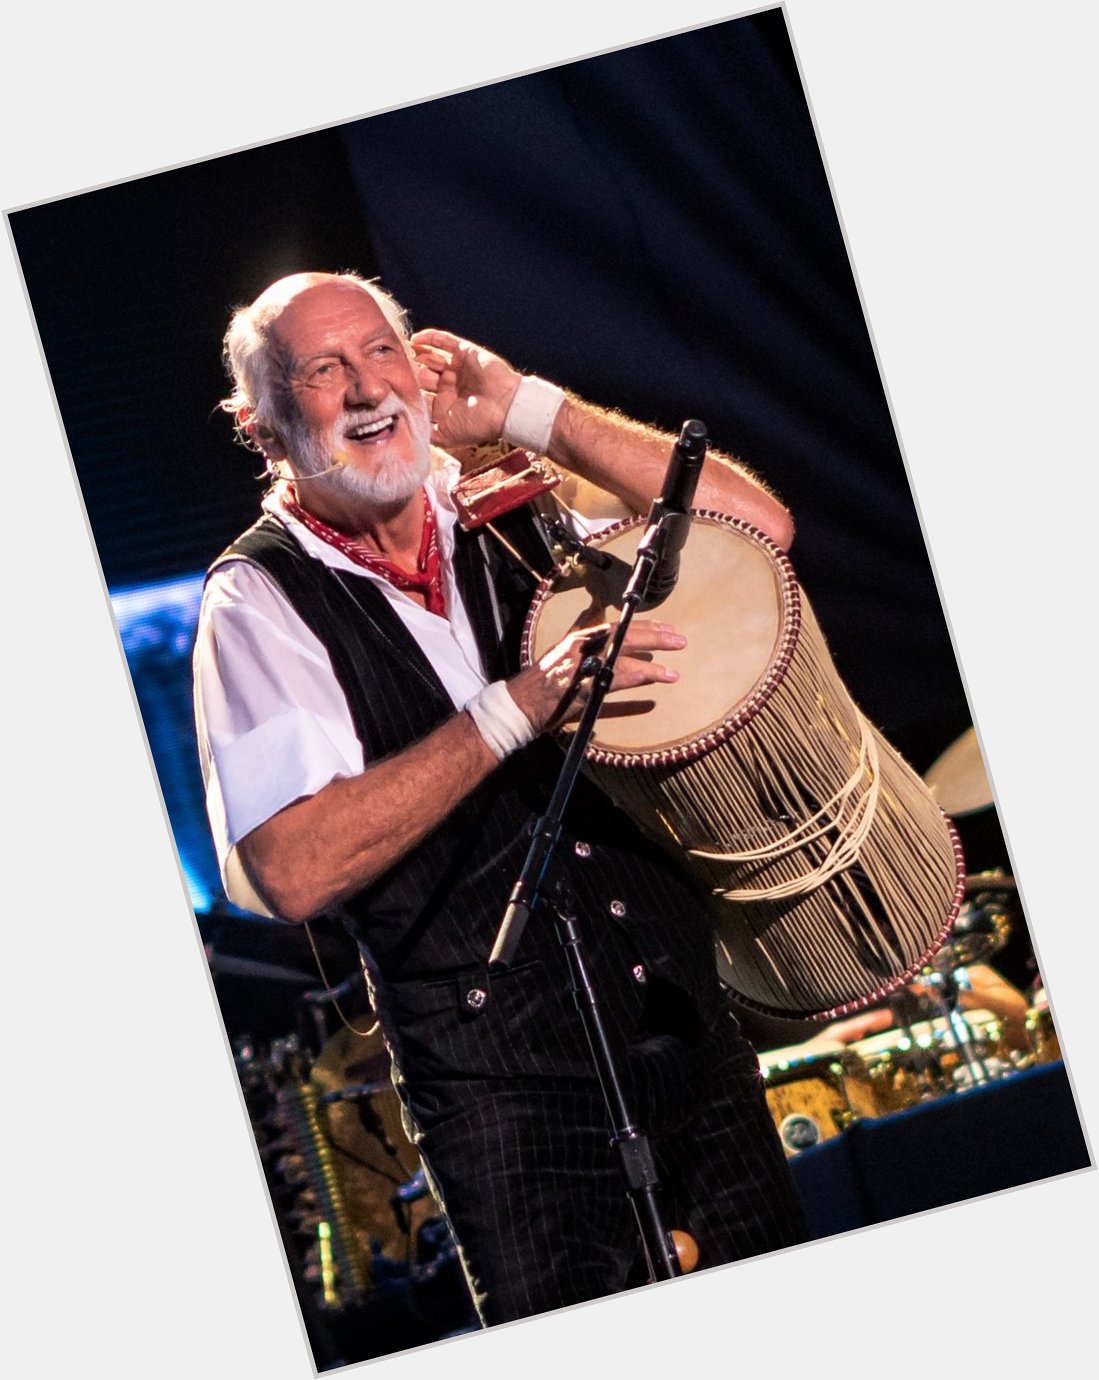   Happy Birthday Mr Mick Fleetwood 75 years young today the greatest drummer of all time. 